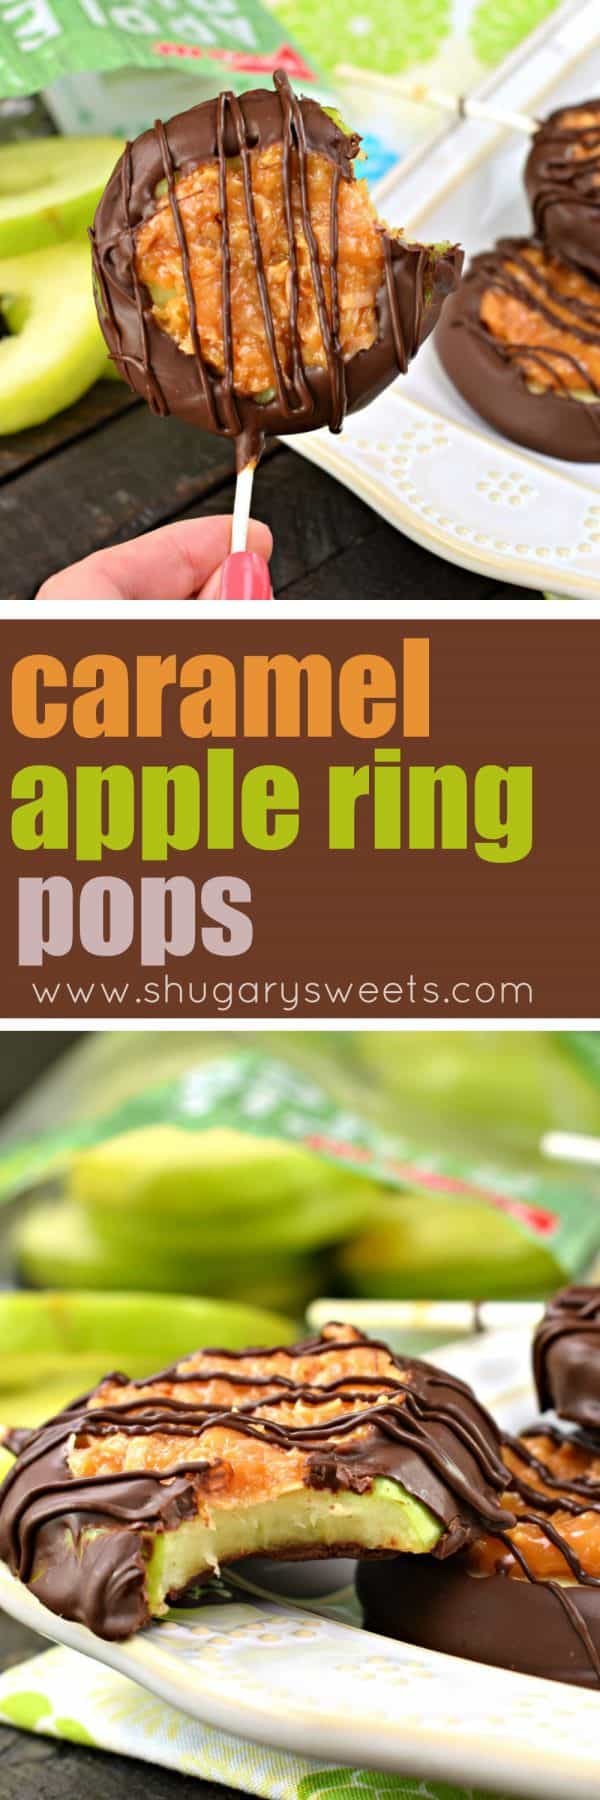 Capture the delicious chocolate, caramel, and coconut flavor of your favorite cookie in this fun, Caramel Apple Ring Pops recipe! Great for snacking, dessert, or bake sales!